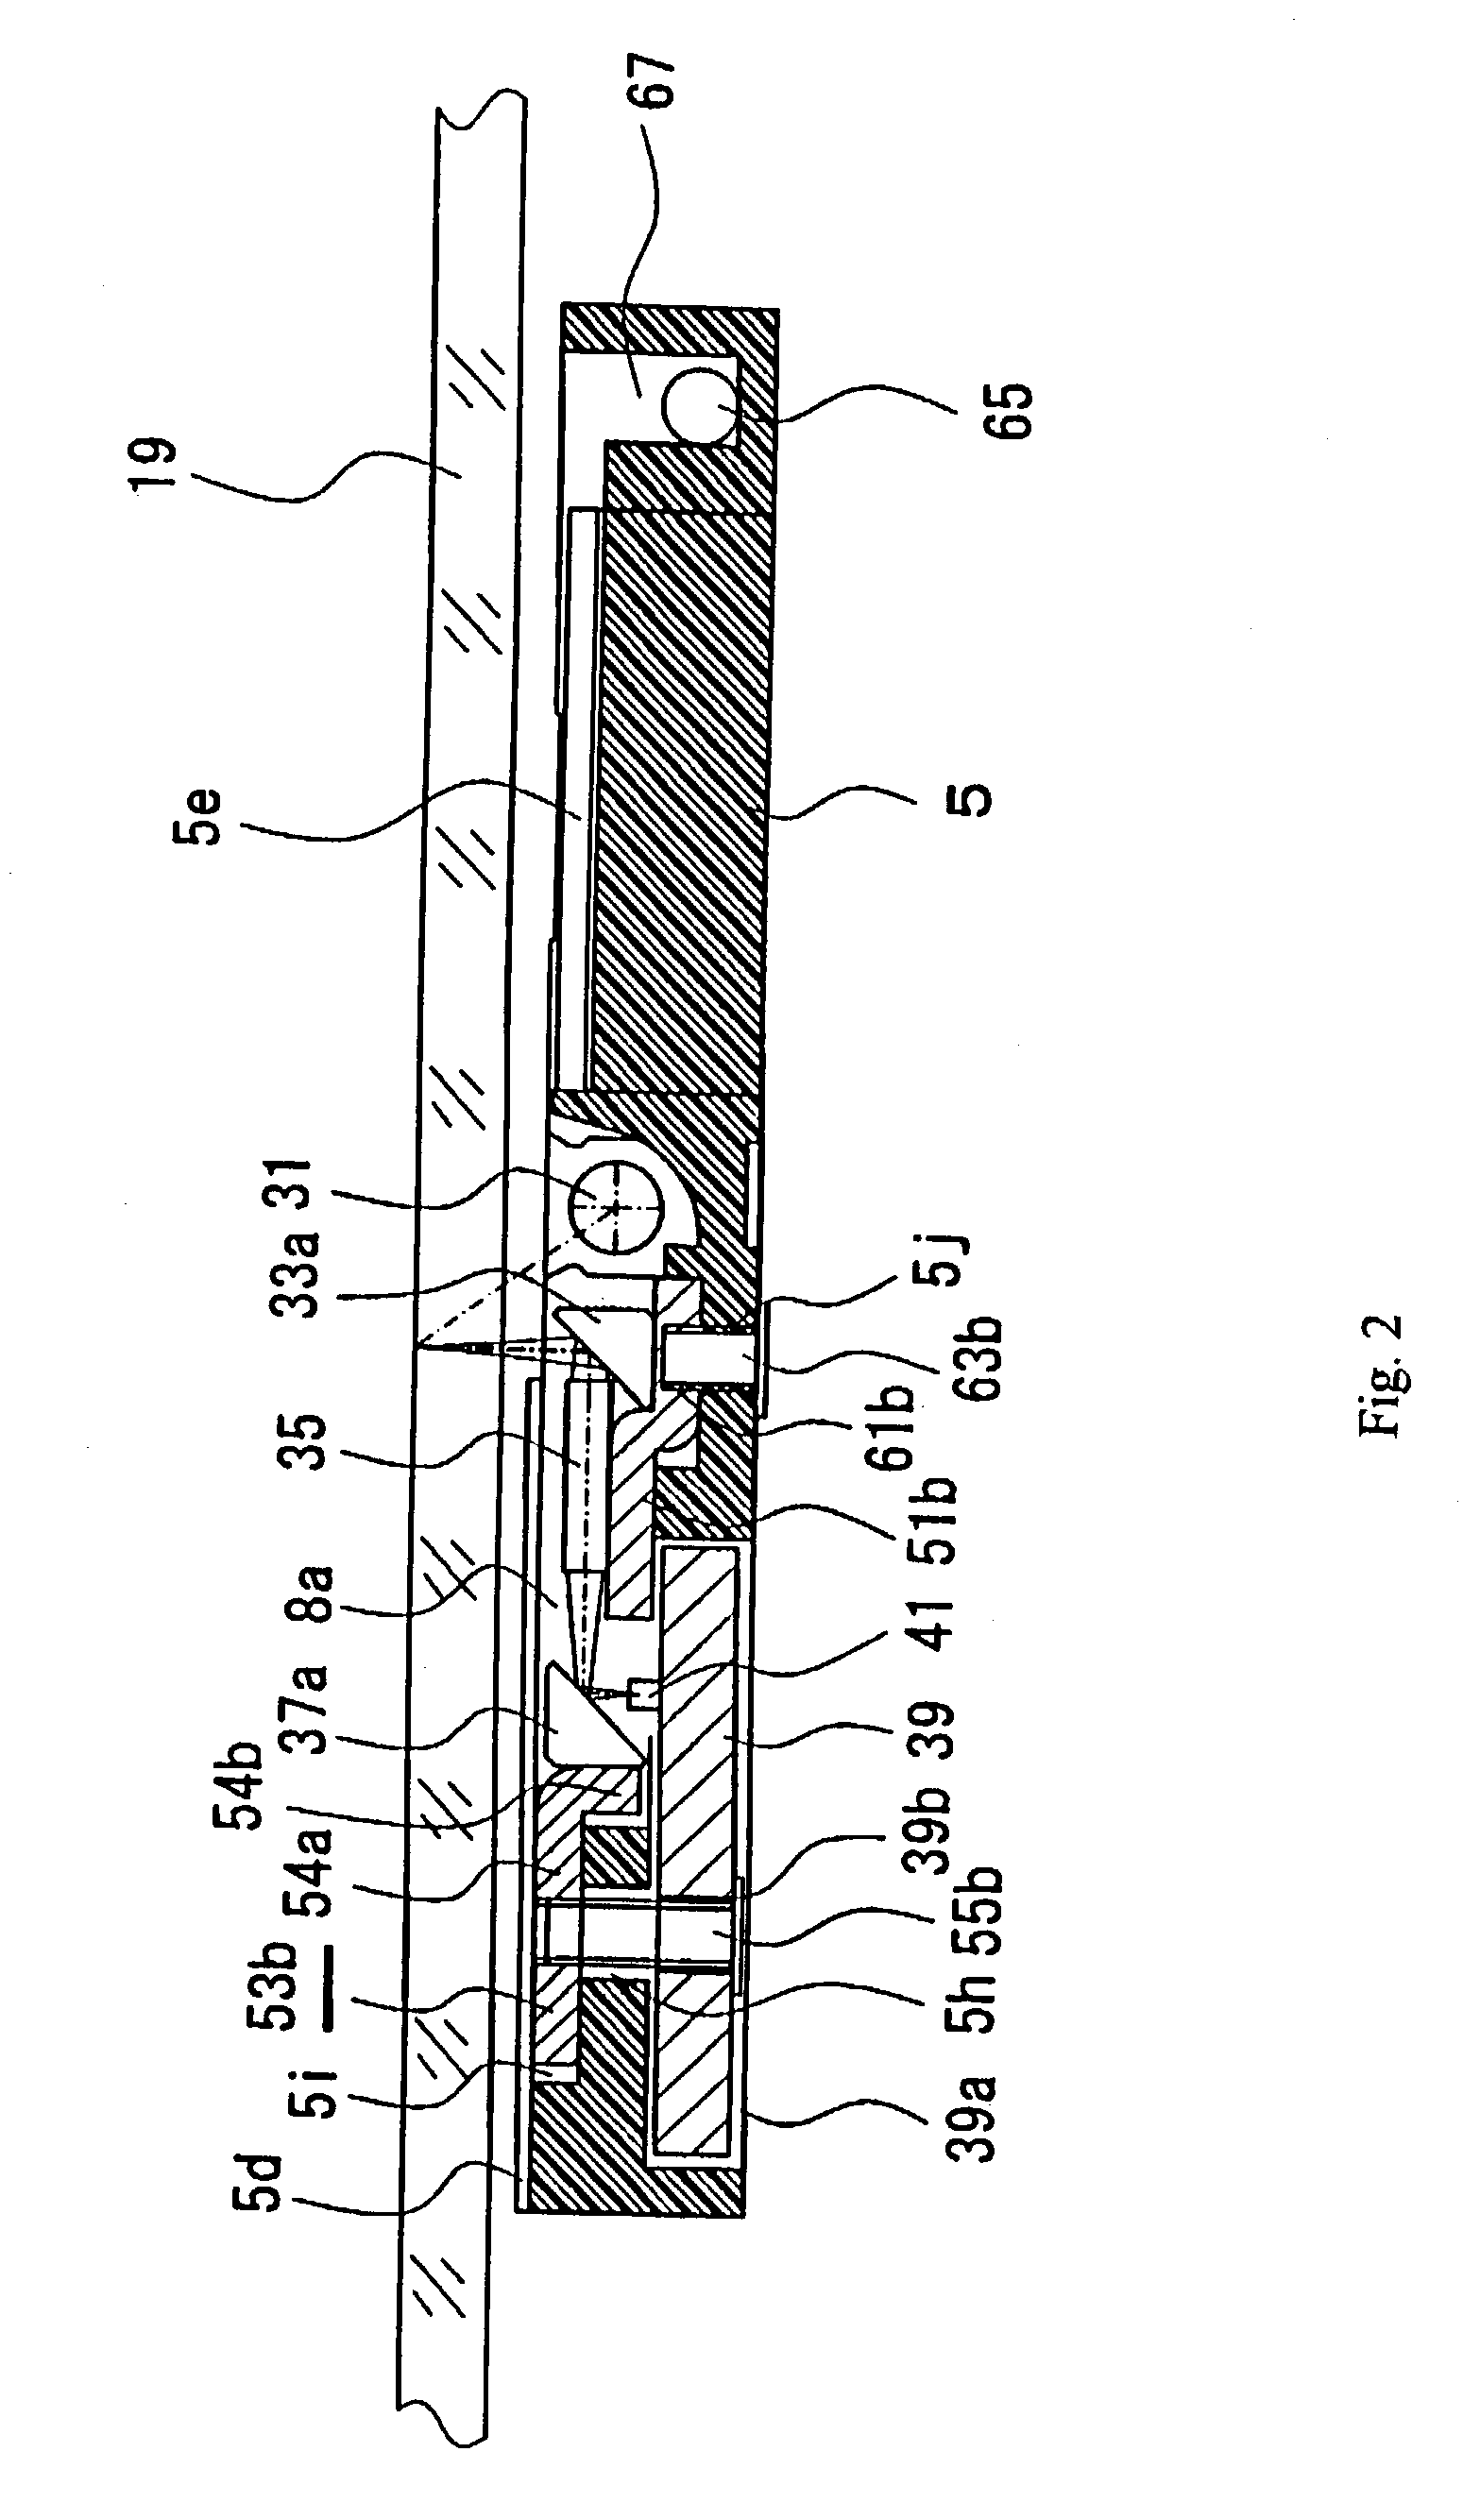 Carriage structure for image-reading device